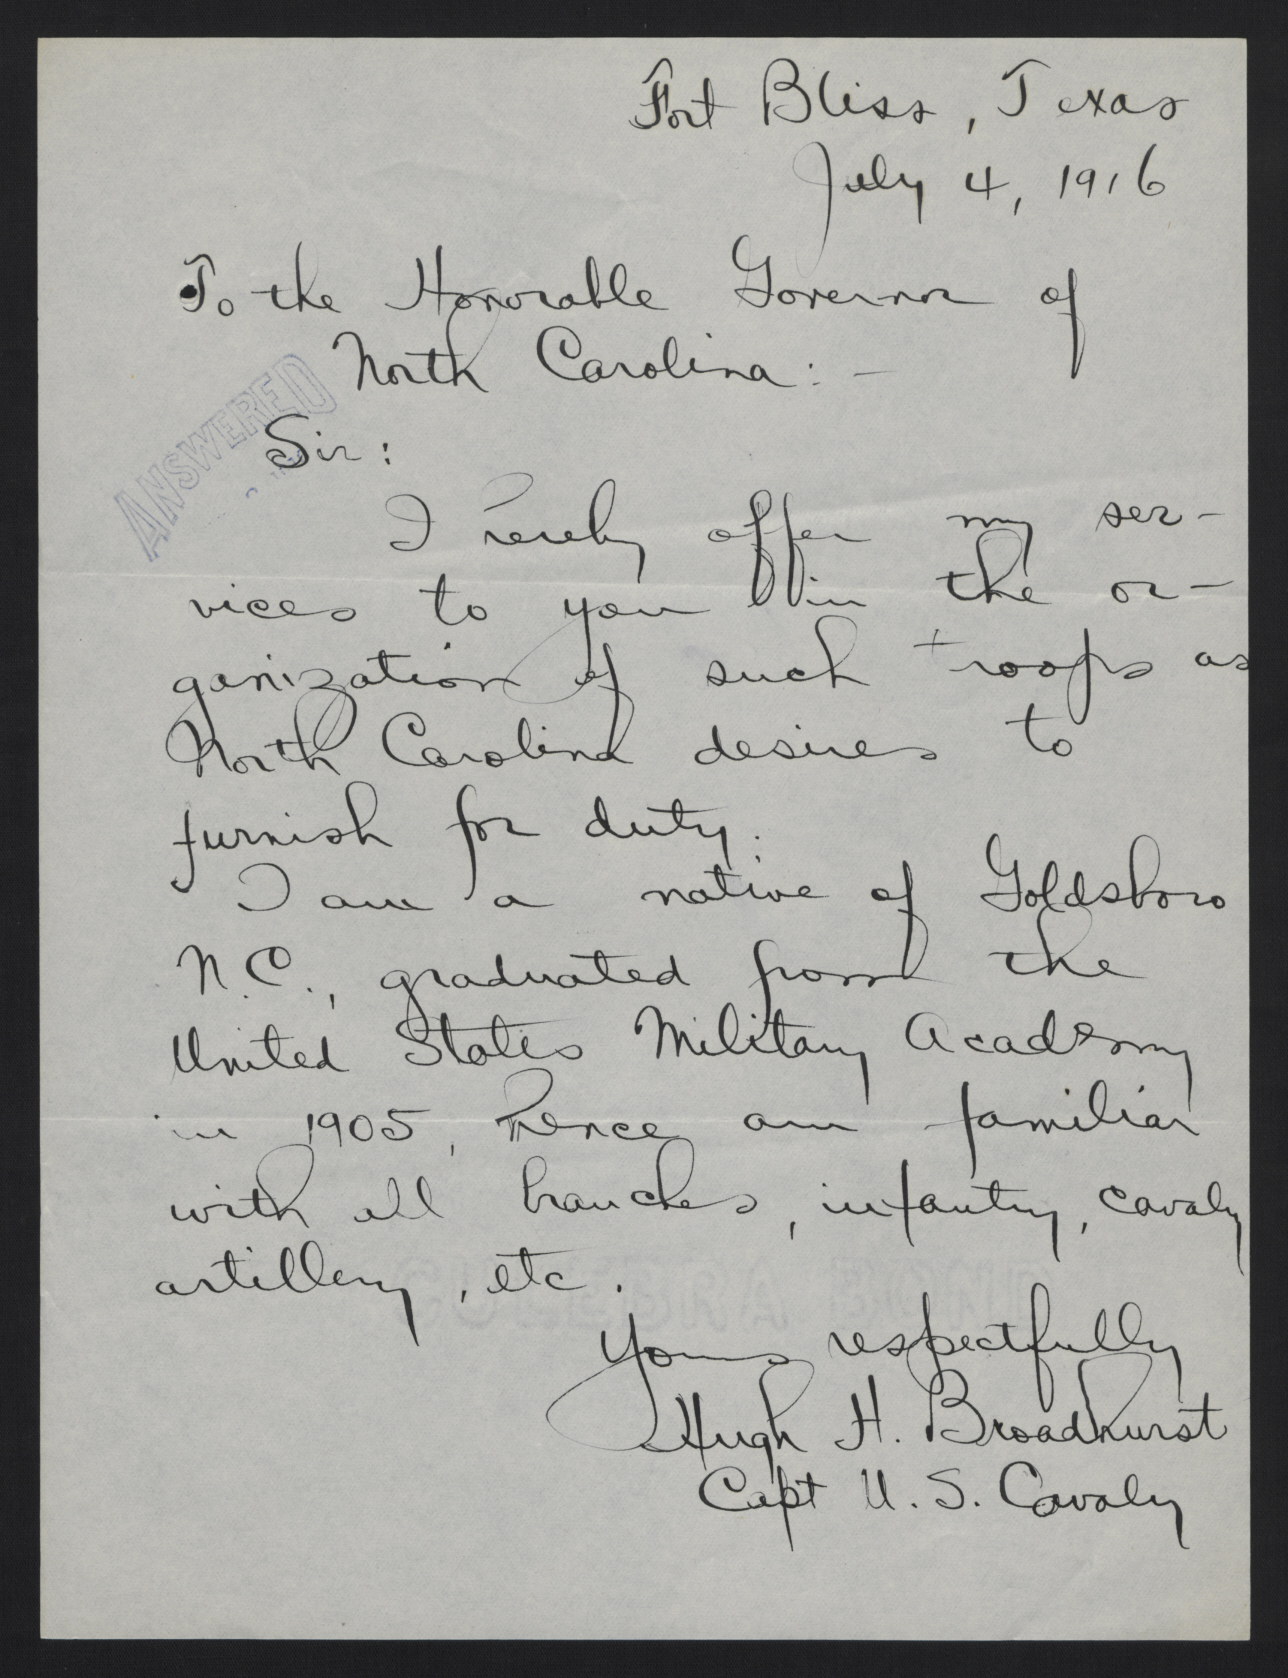 Letter from Broadhurst to Craig, July 4, 1916